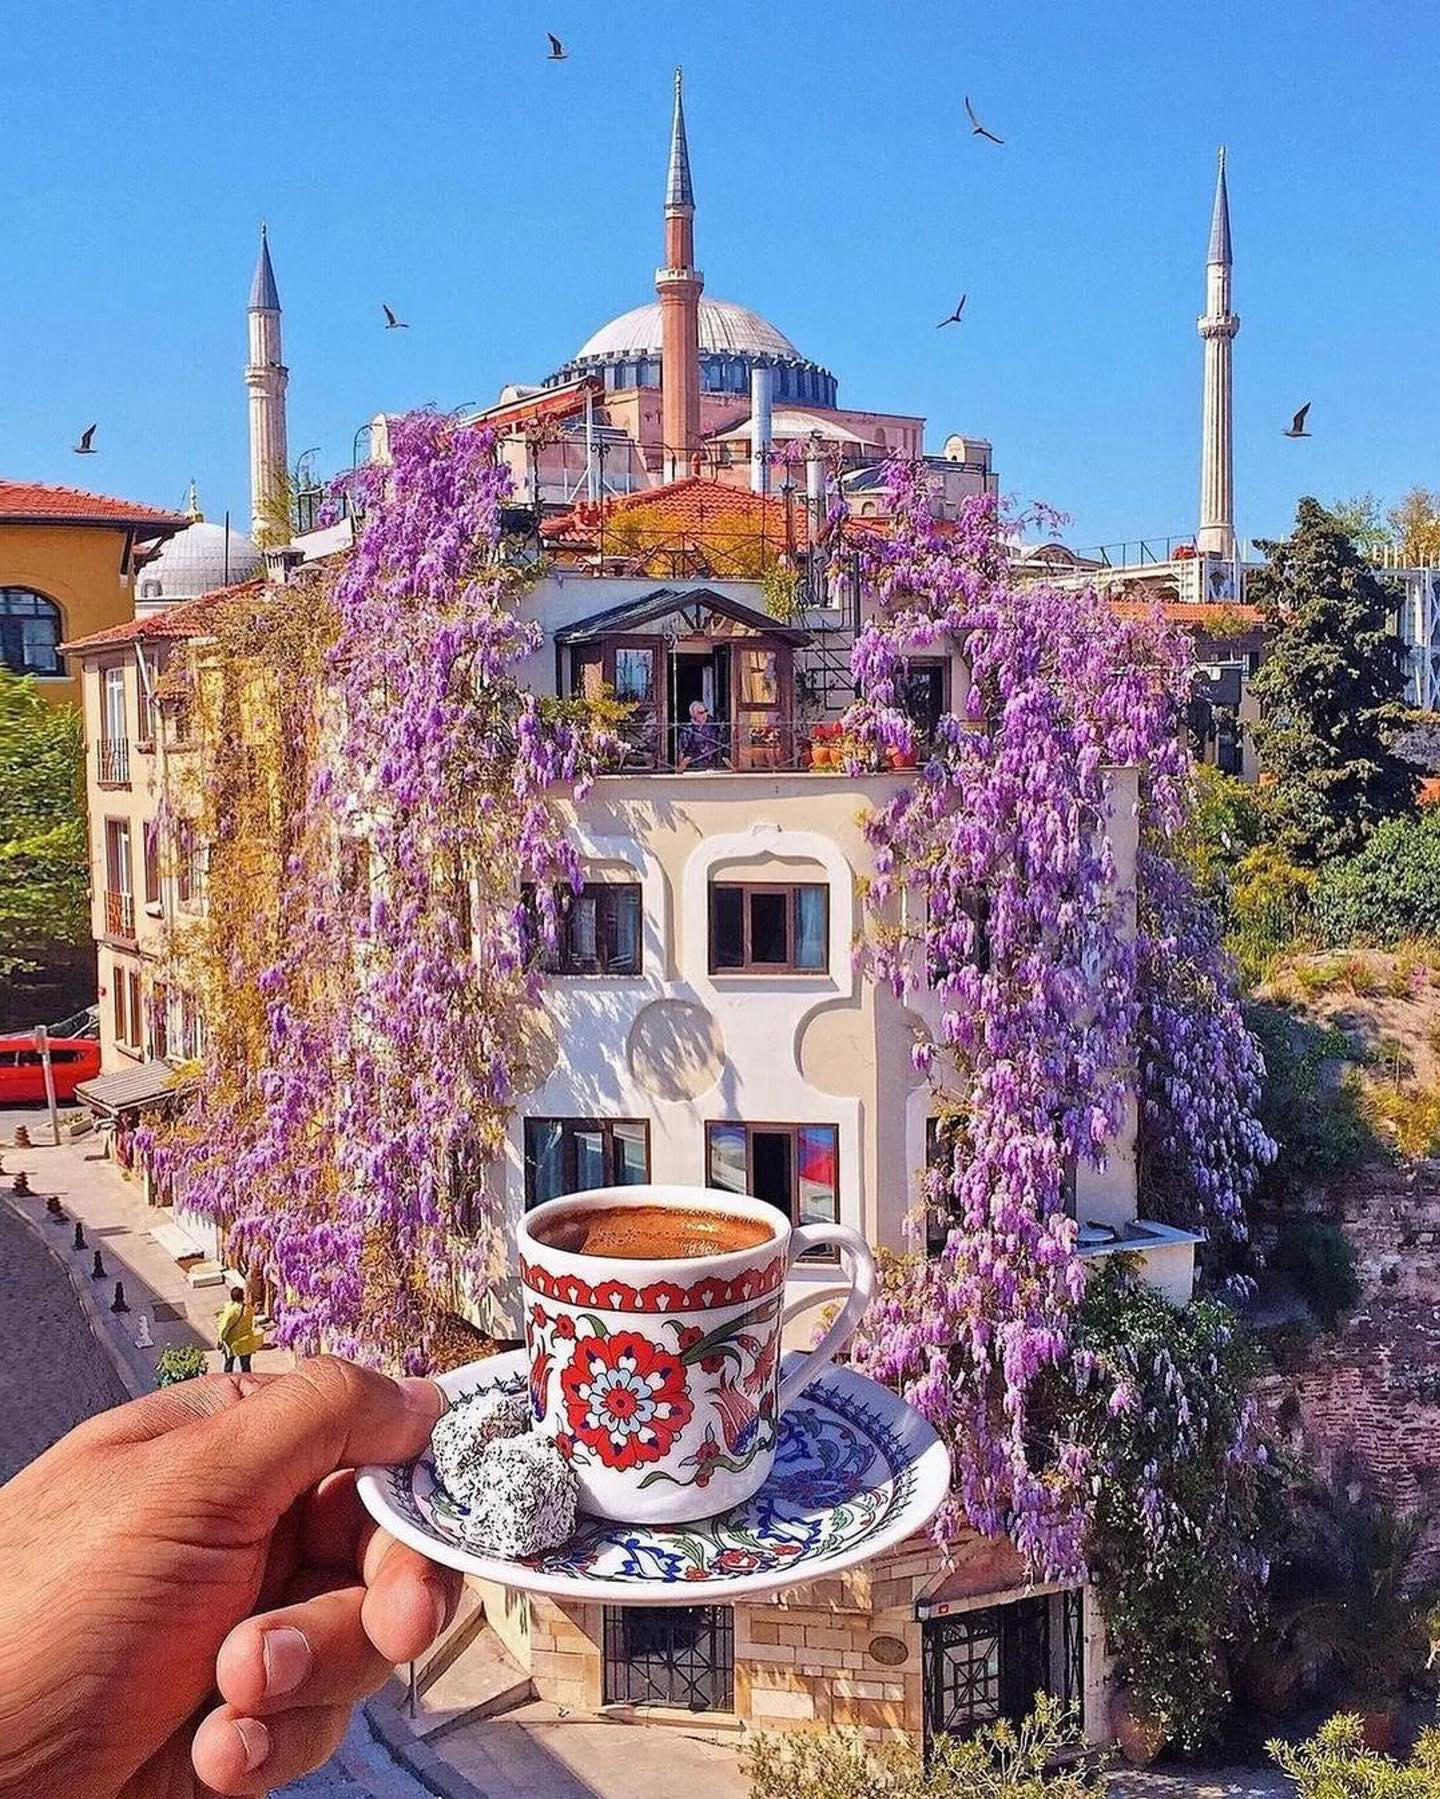 But first let me drink a turkish coffee